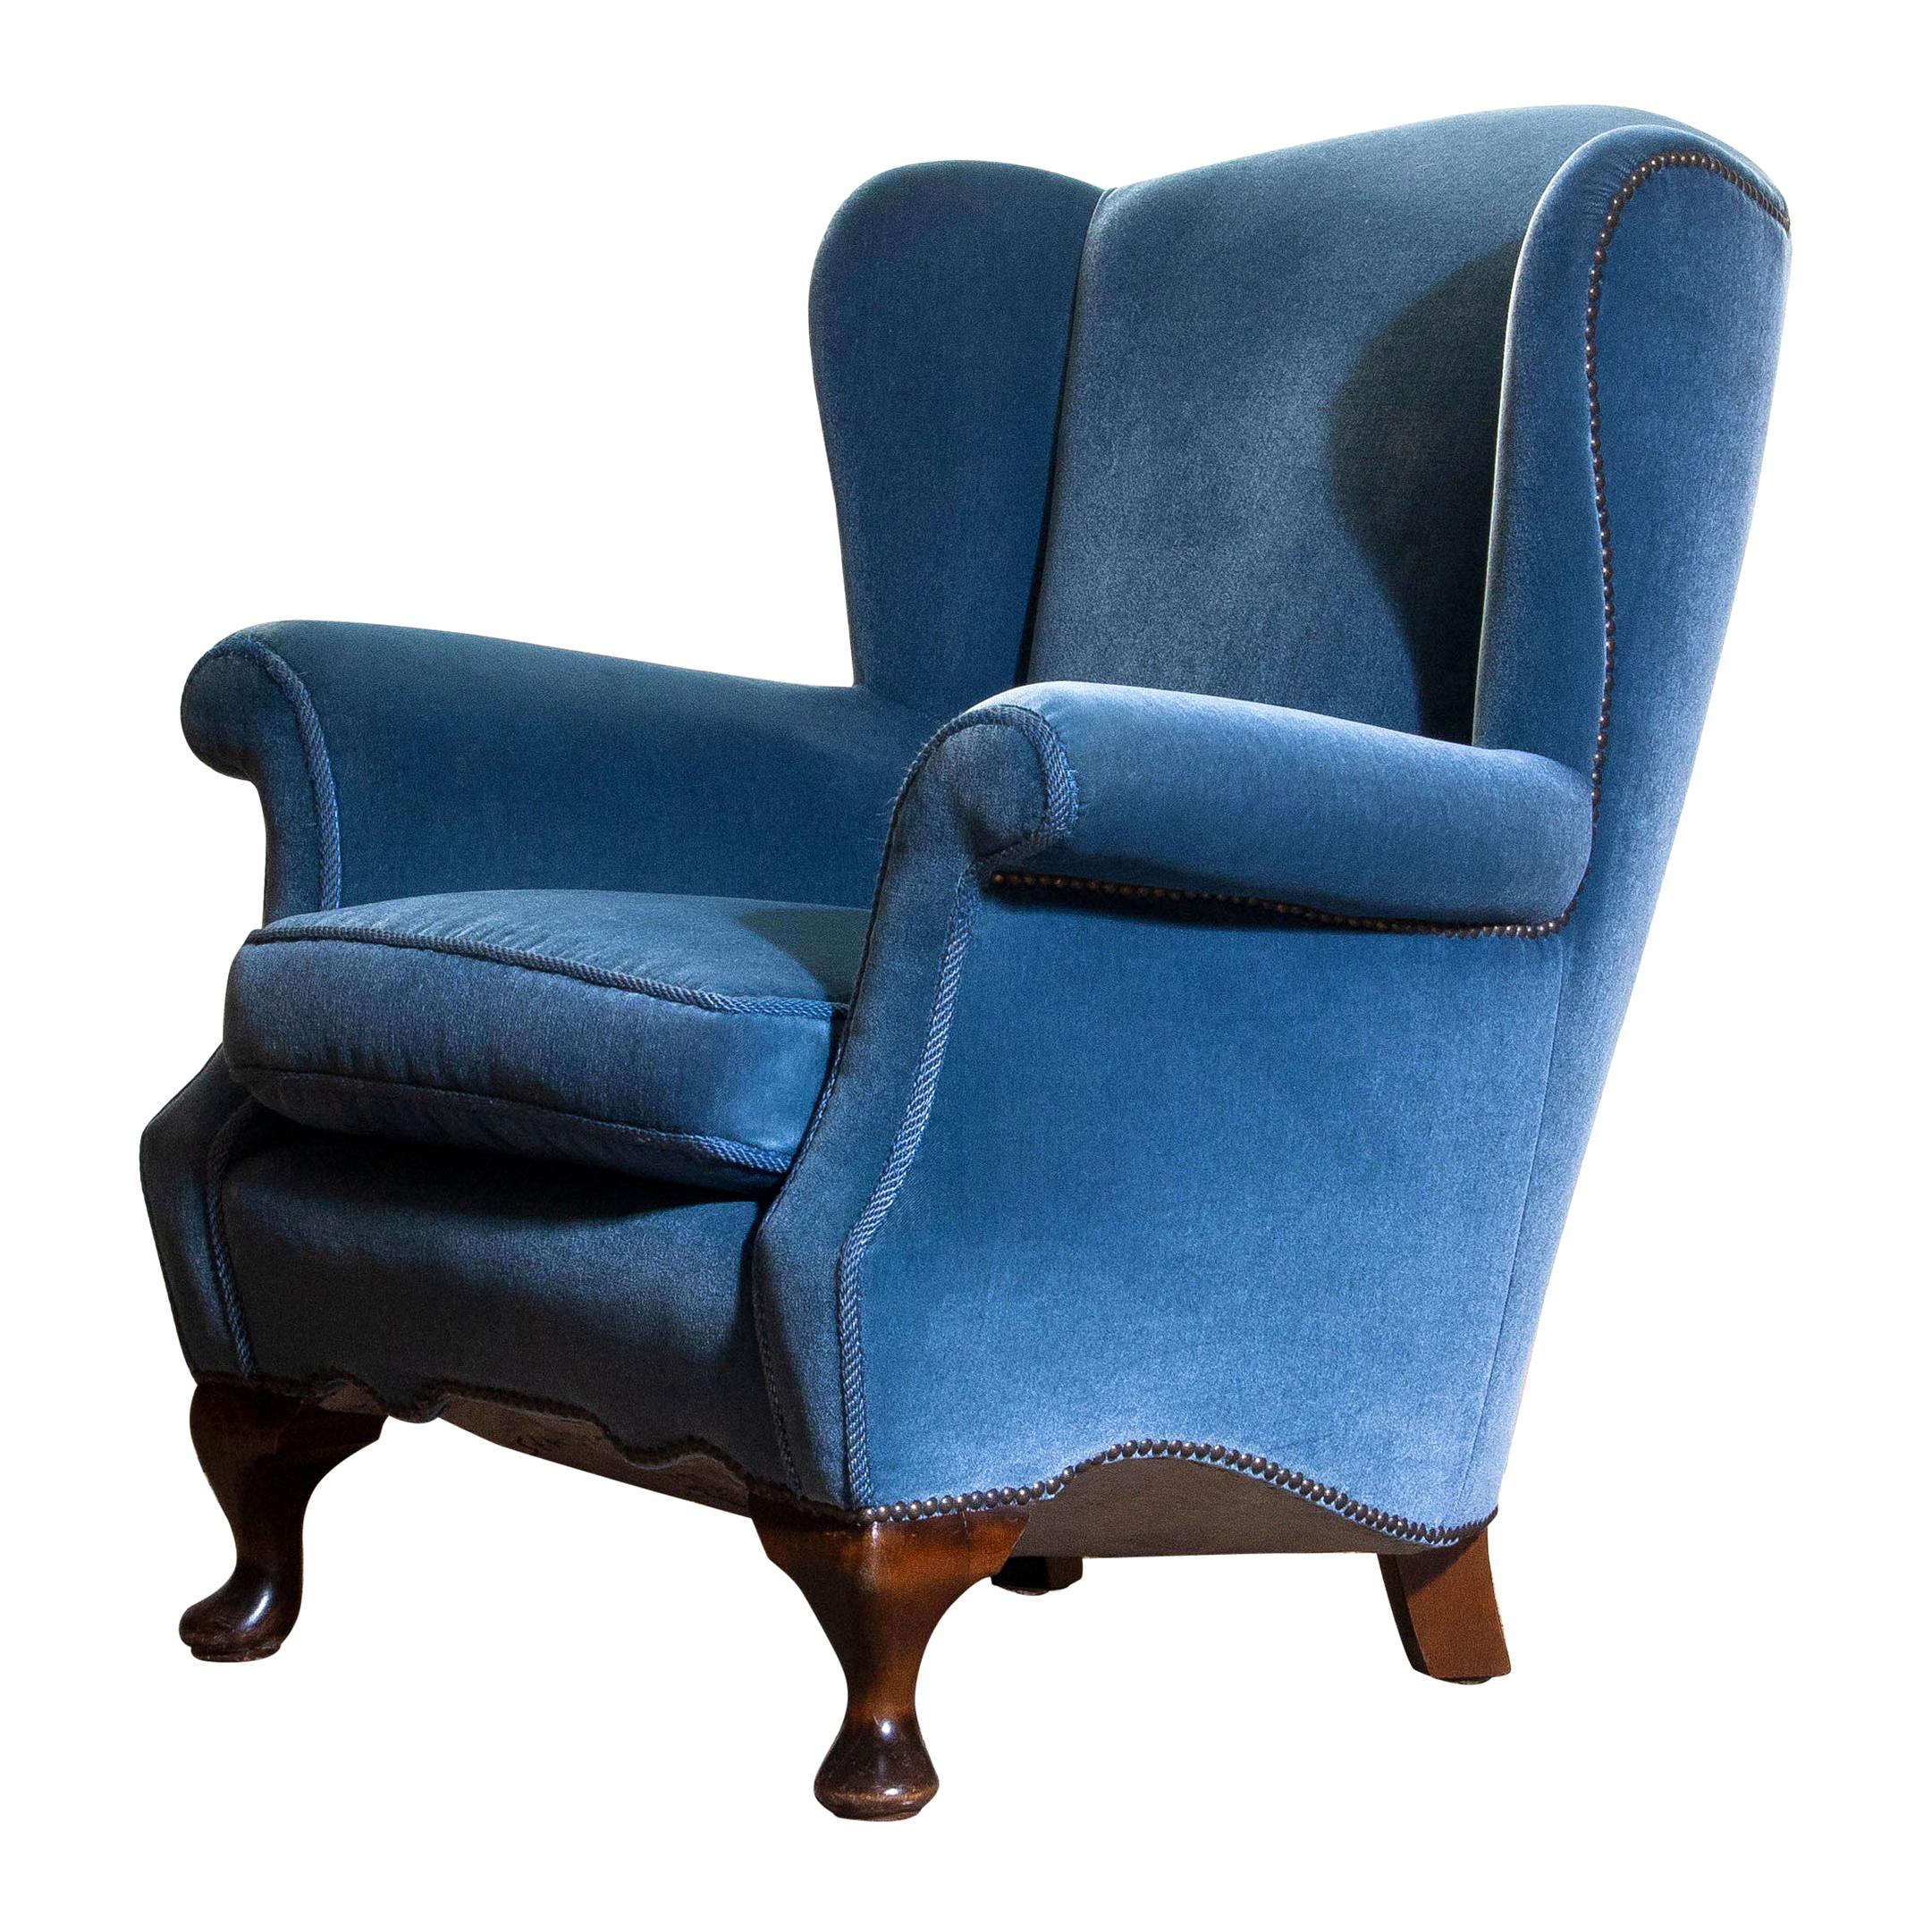 Unique and extremely beautiful Hollywood Regency club chair in blue velvet from the 1920s.
The chair is completely restored in 1987 (only original materials are used).
The overall condition of this chair is very comfortable and good